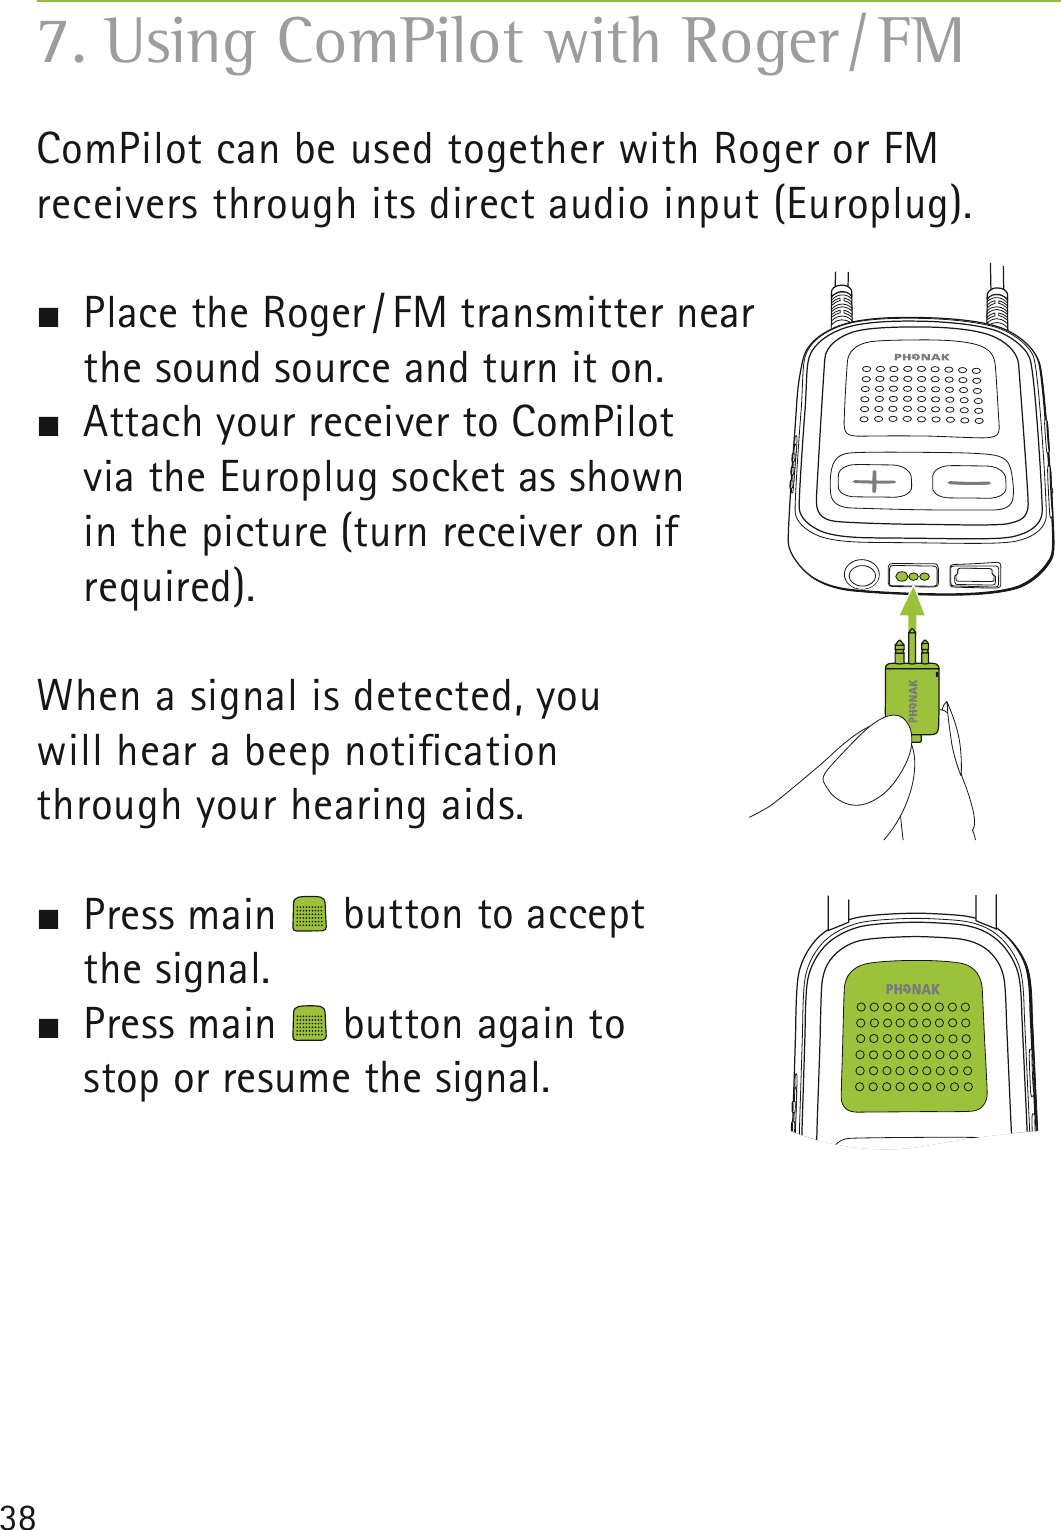 38ComPilot can be used together with Roger or FM  receivers through its direct audio input (Europlug).  Place the Roger / FM transmitter near  the sound source and turn it on.  Attach your receiver to ComPilot     via the Europlug socket as shown  in the picture (turn receiver on if  required).When a signal is detected, you  will hear a beep notiﬁcation  through your hearing aids.  Press main   button to accept  the signal. Press main   button again to  stop or resume the signal.7. Using ComPilot with Roger / FM